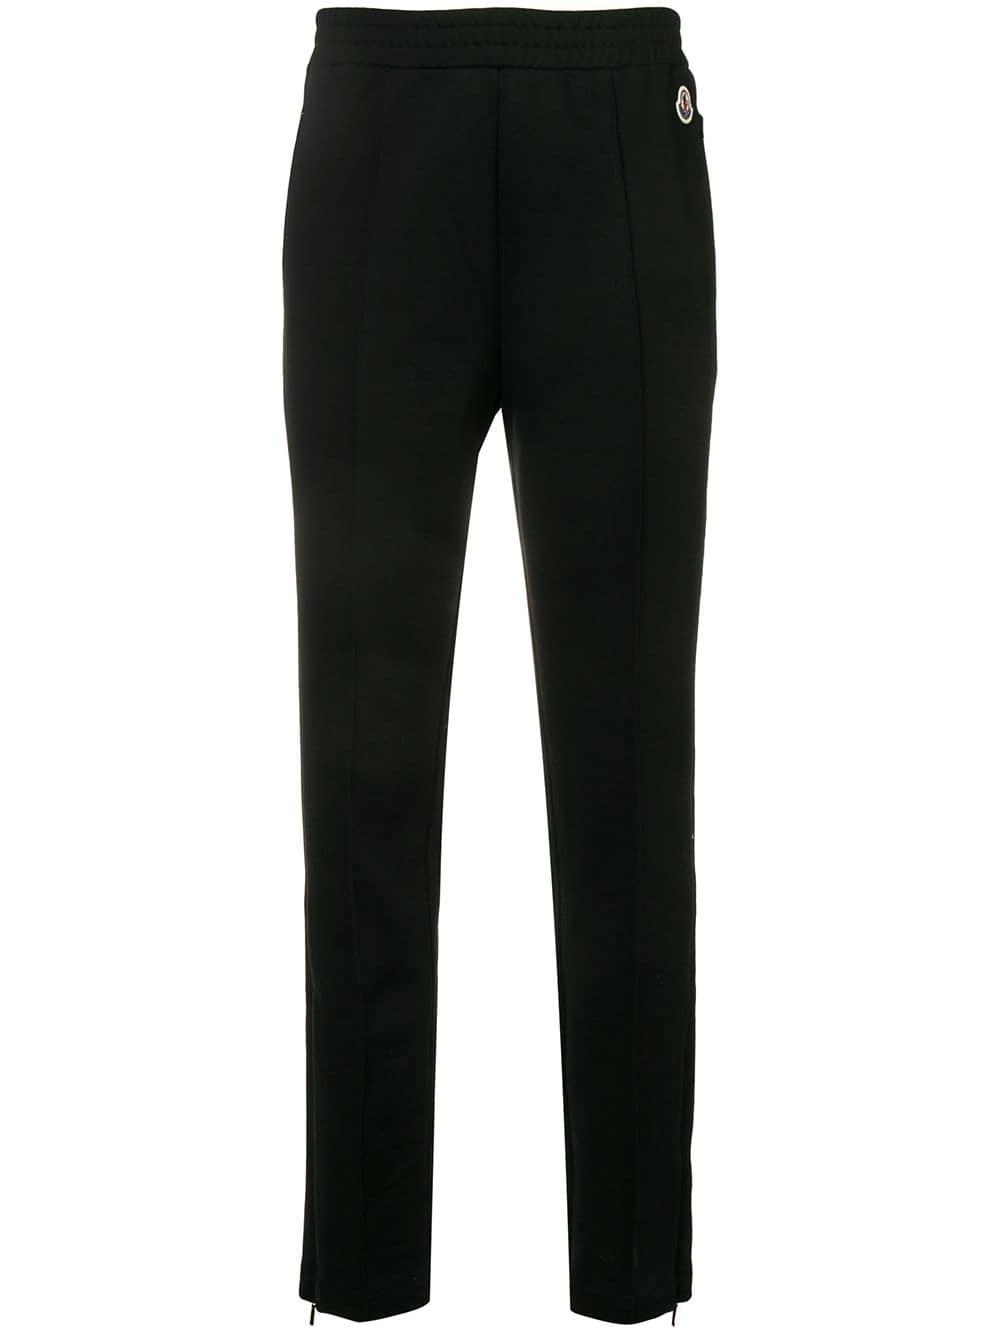 Moncler Cotton Track Trousers in Black - Lyst